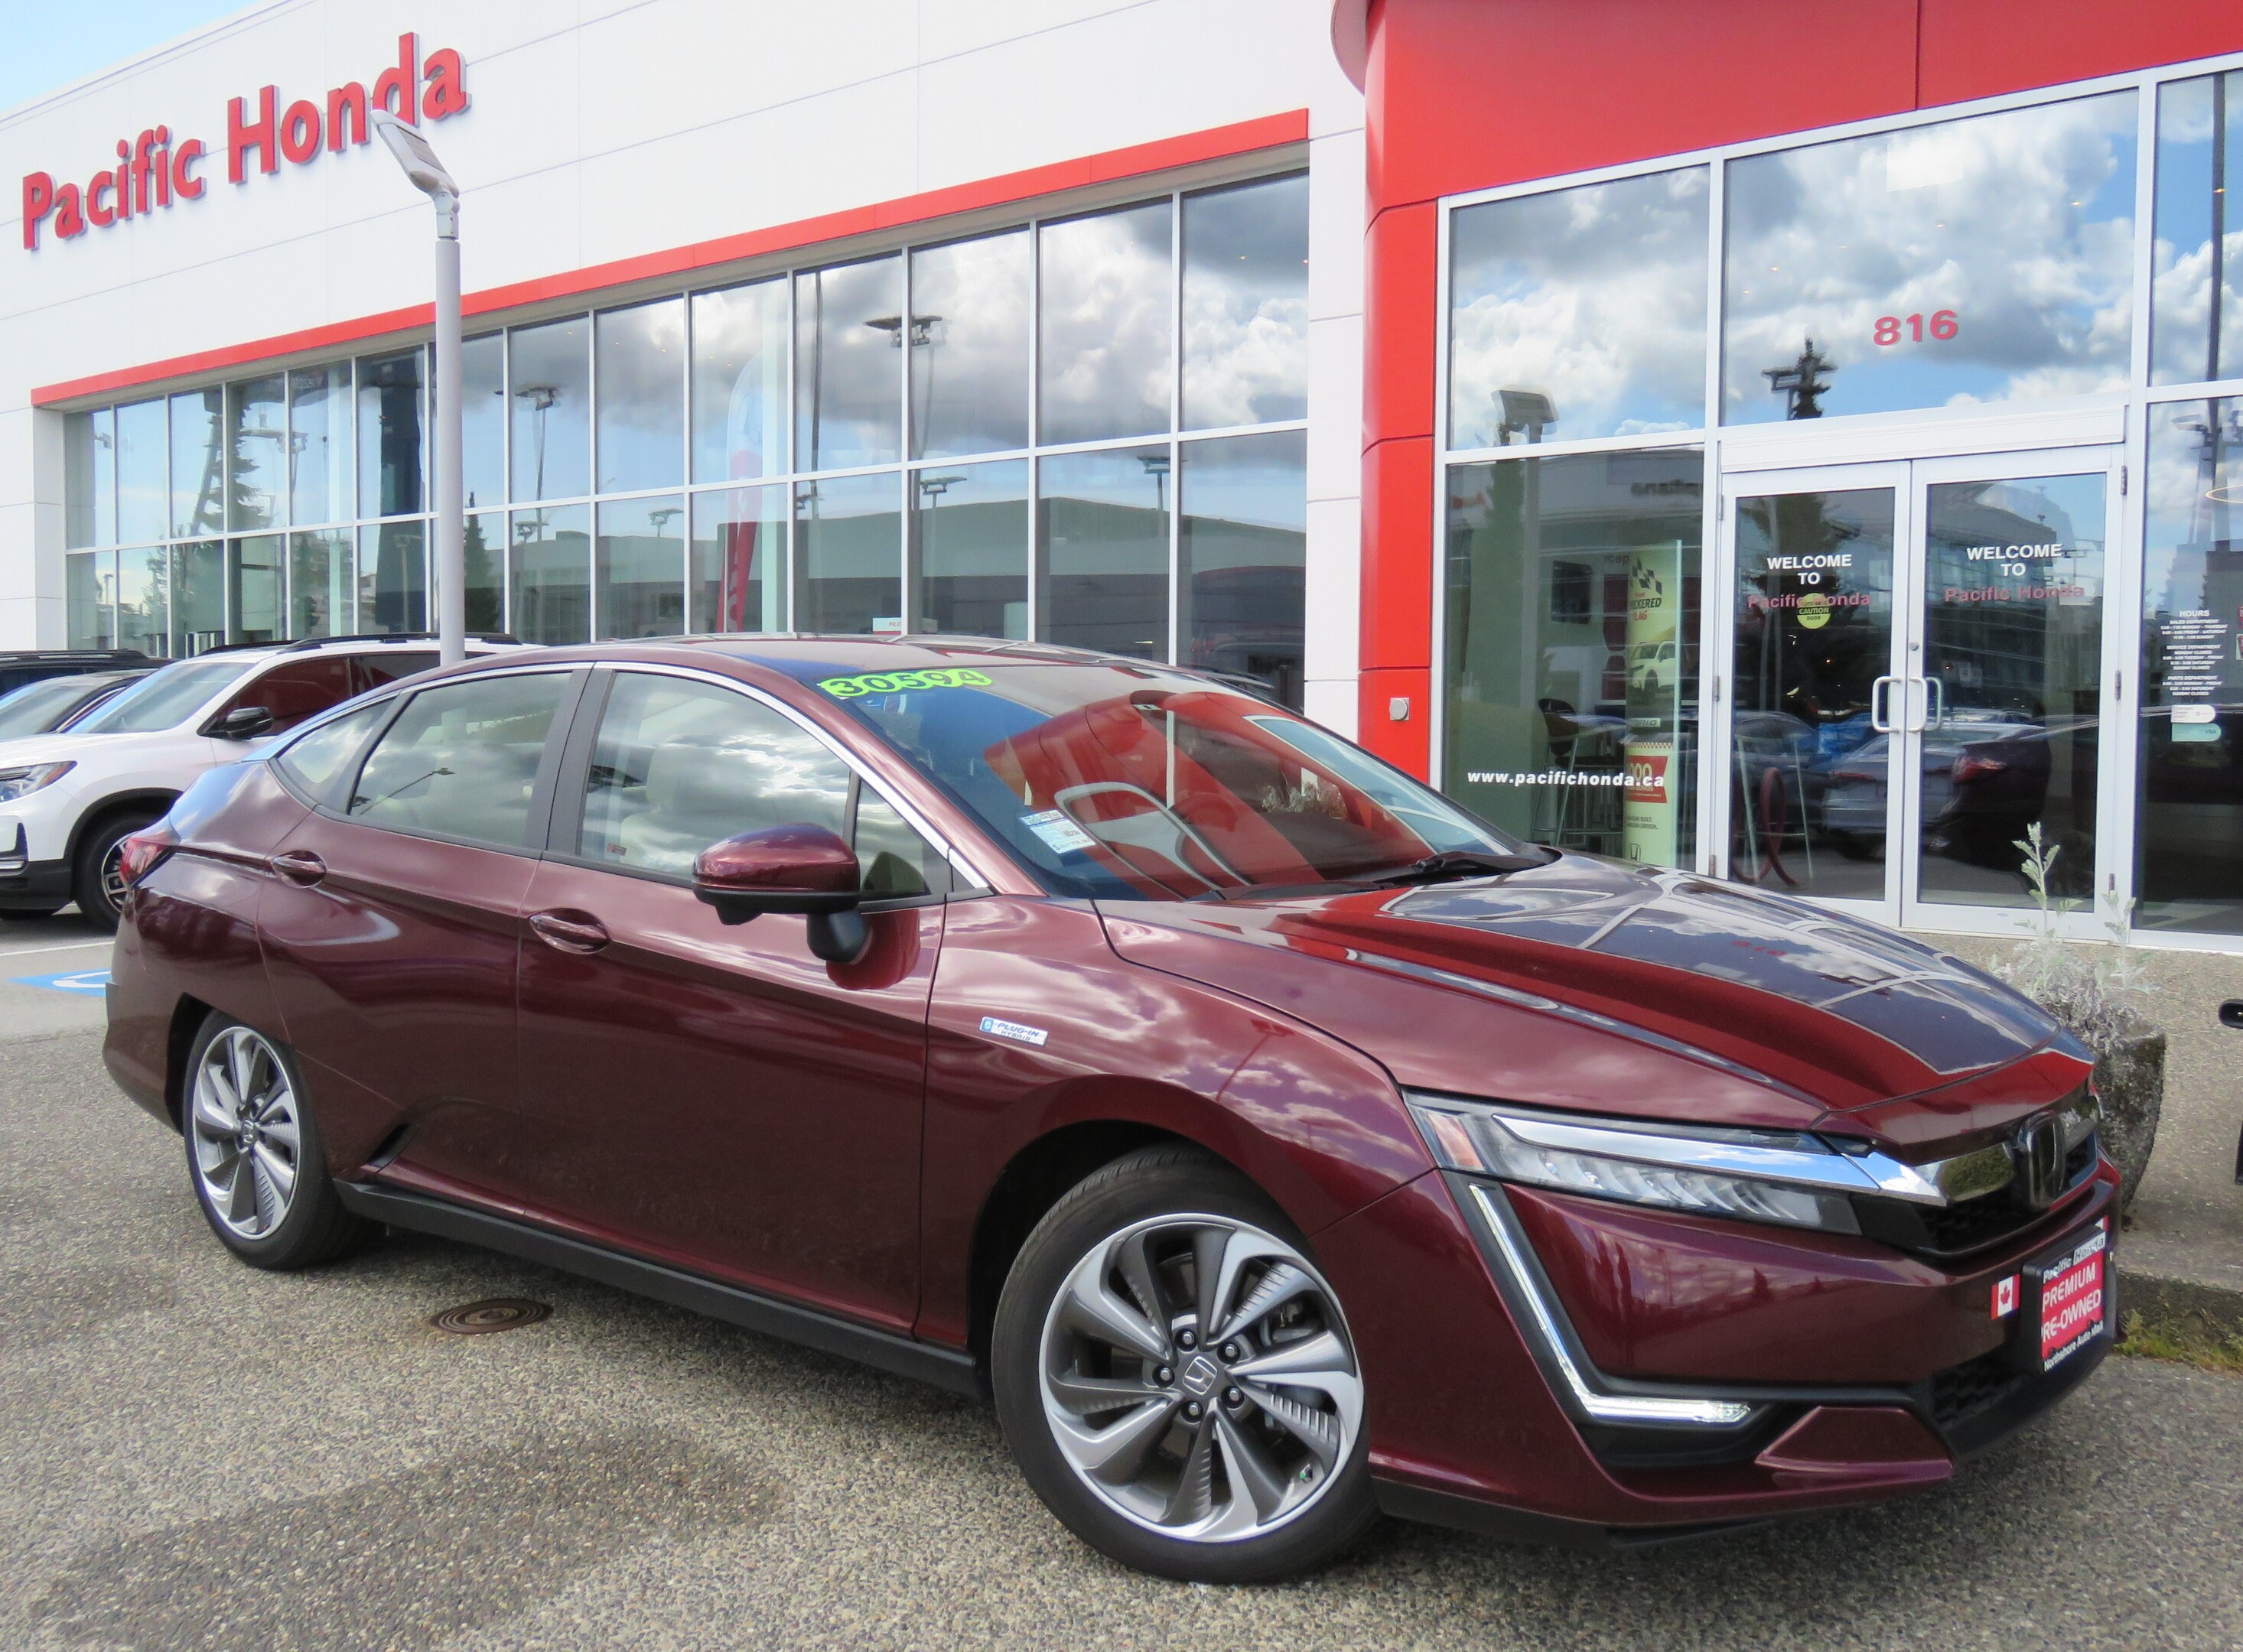 2018 Honda CLARITY PLUG-IN TOURING TOURING, $0 PST, HYBRID PLUG IN, APPLE CAR